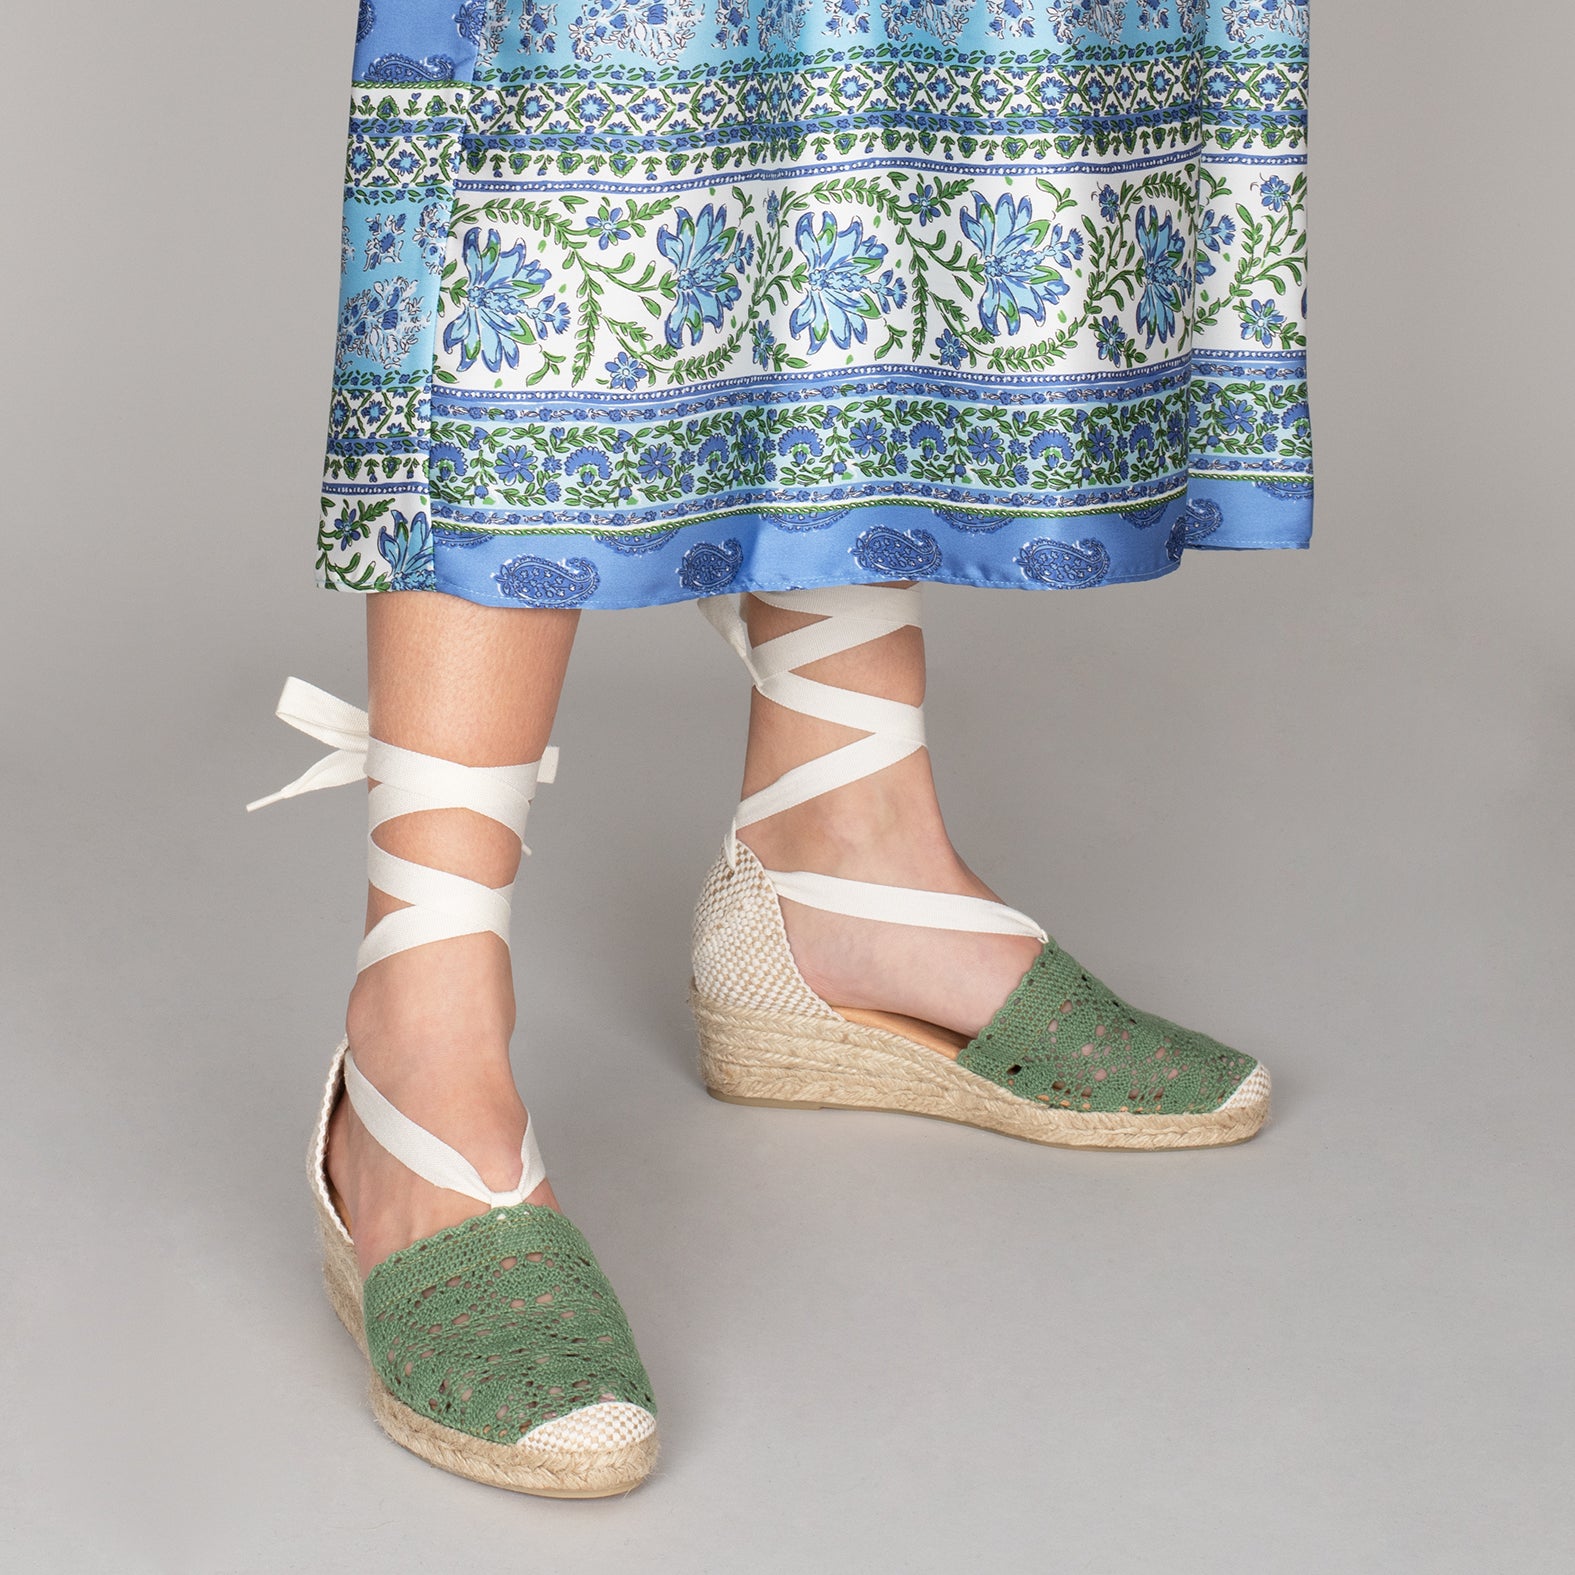 DEIÀ – GREEN crocheted espadrilles with laces